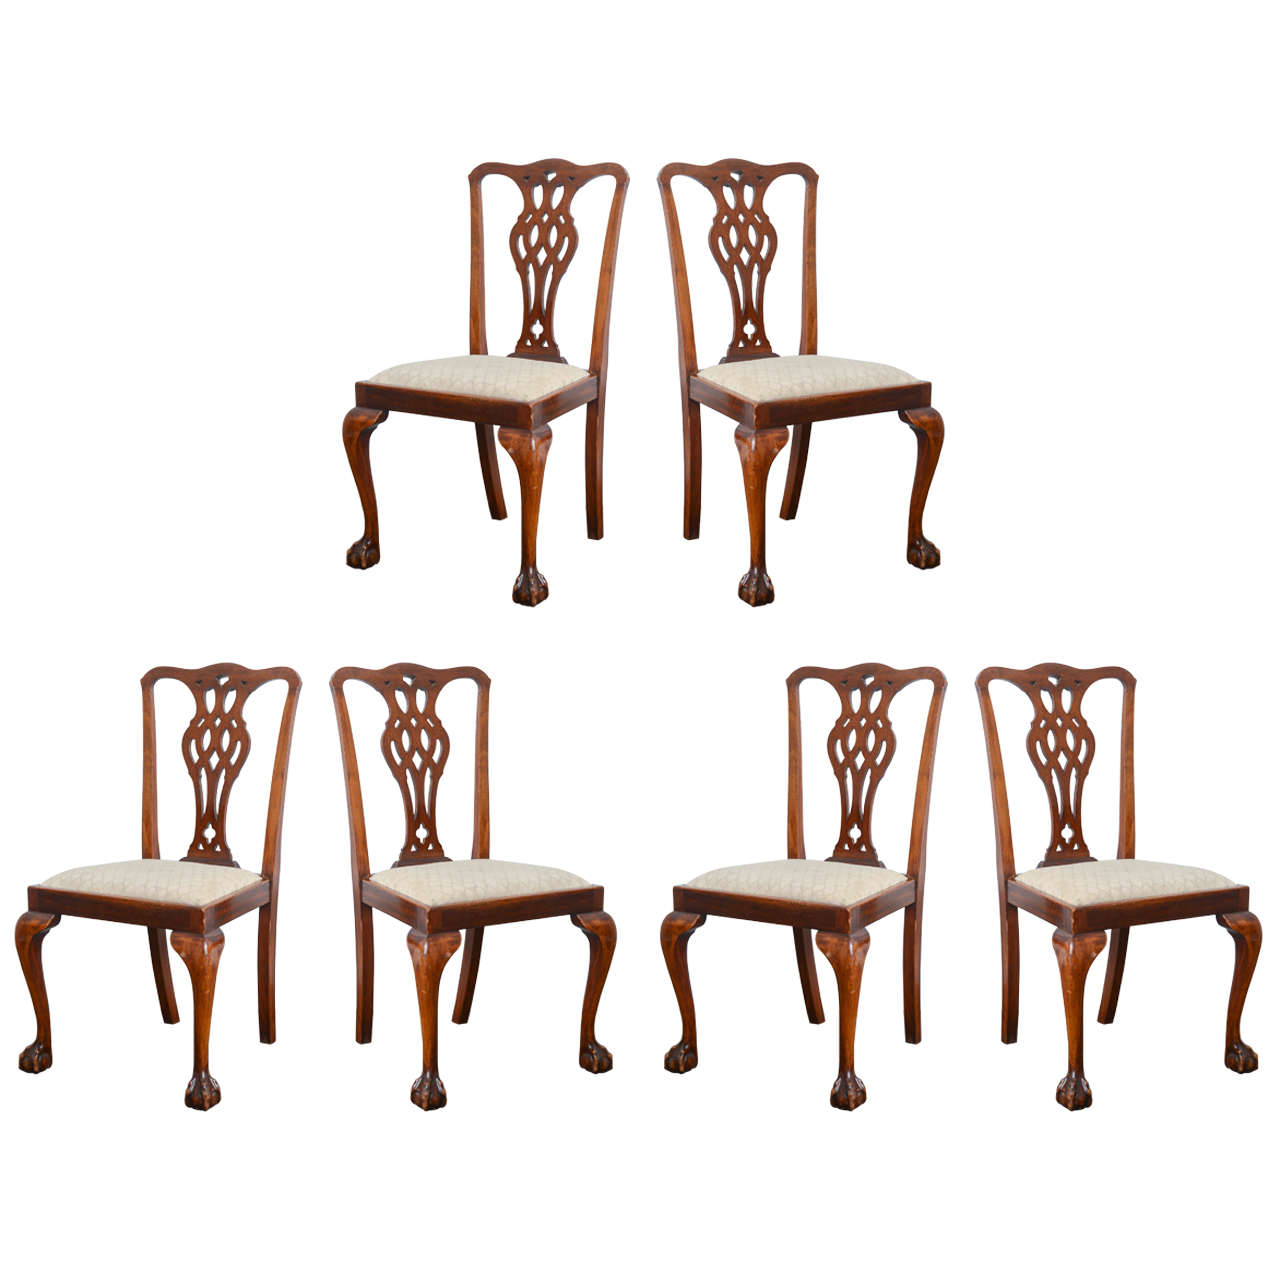 Set of Six Mahogany English Chippendale Style Dining Chairs